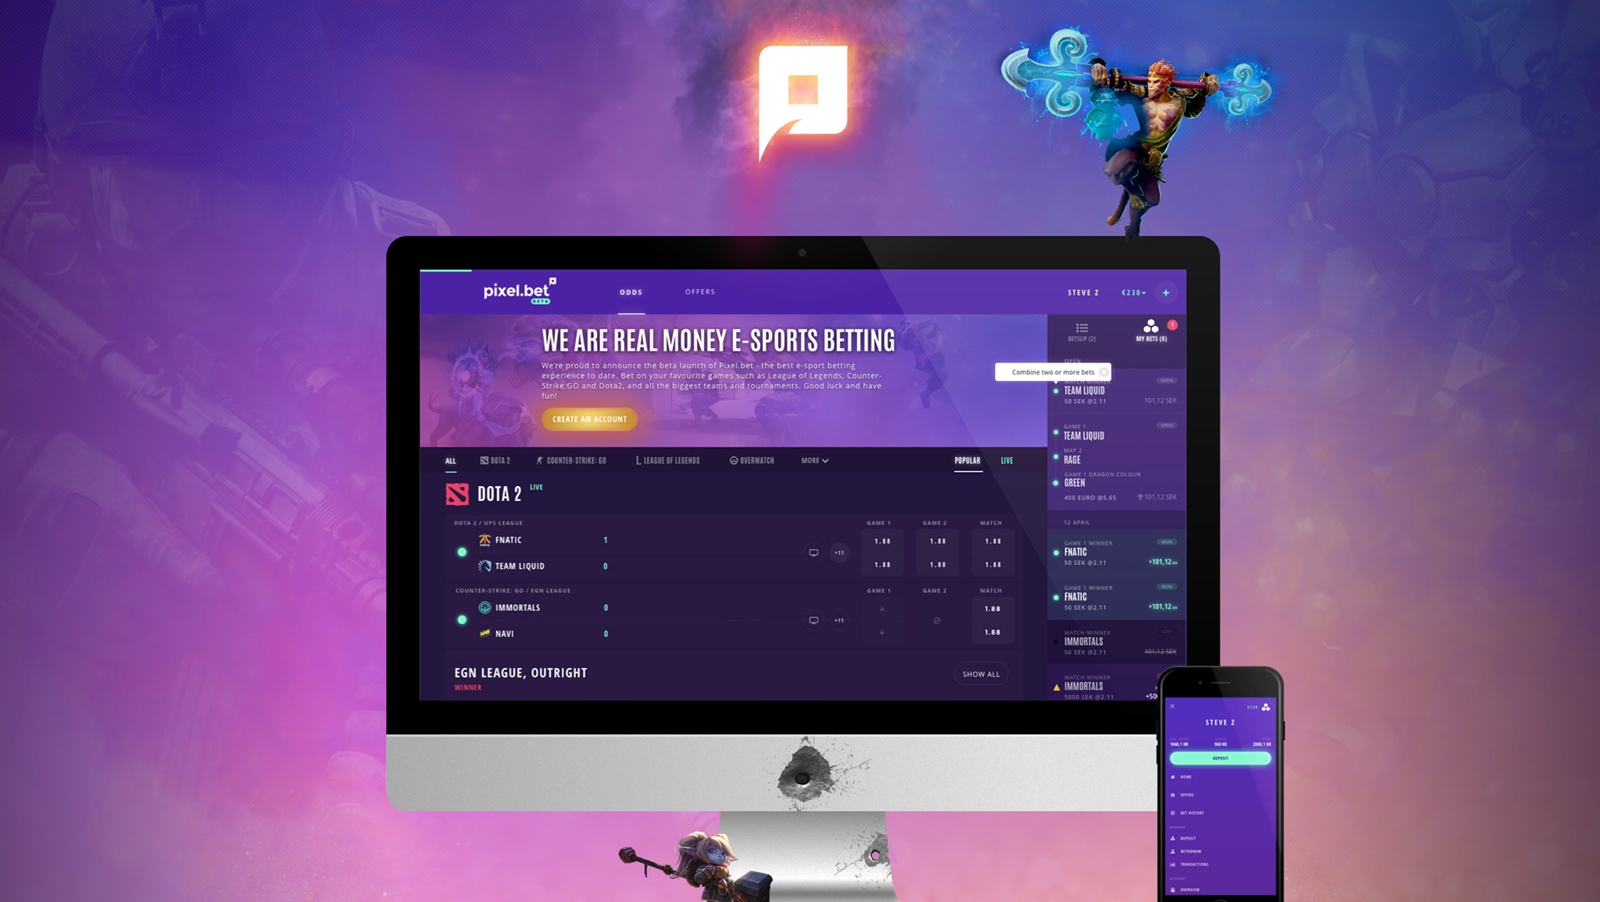 Pixel.bet ready to revolutionise eSports betting with new dedicated platform